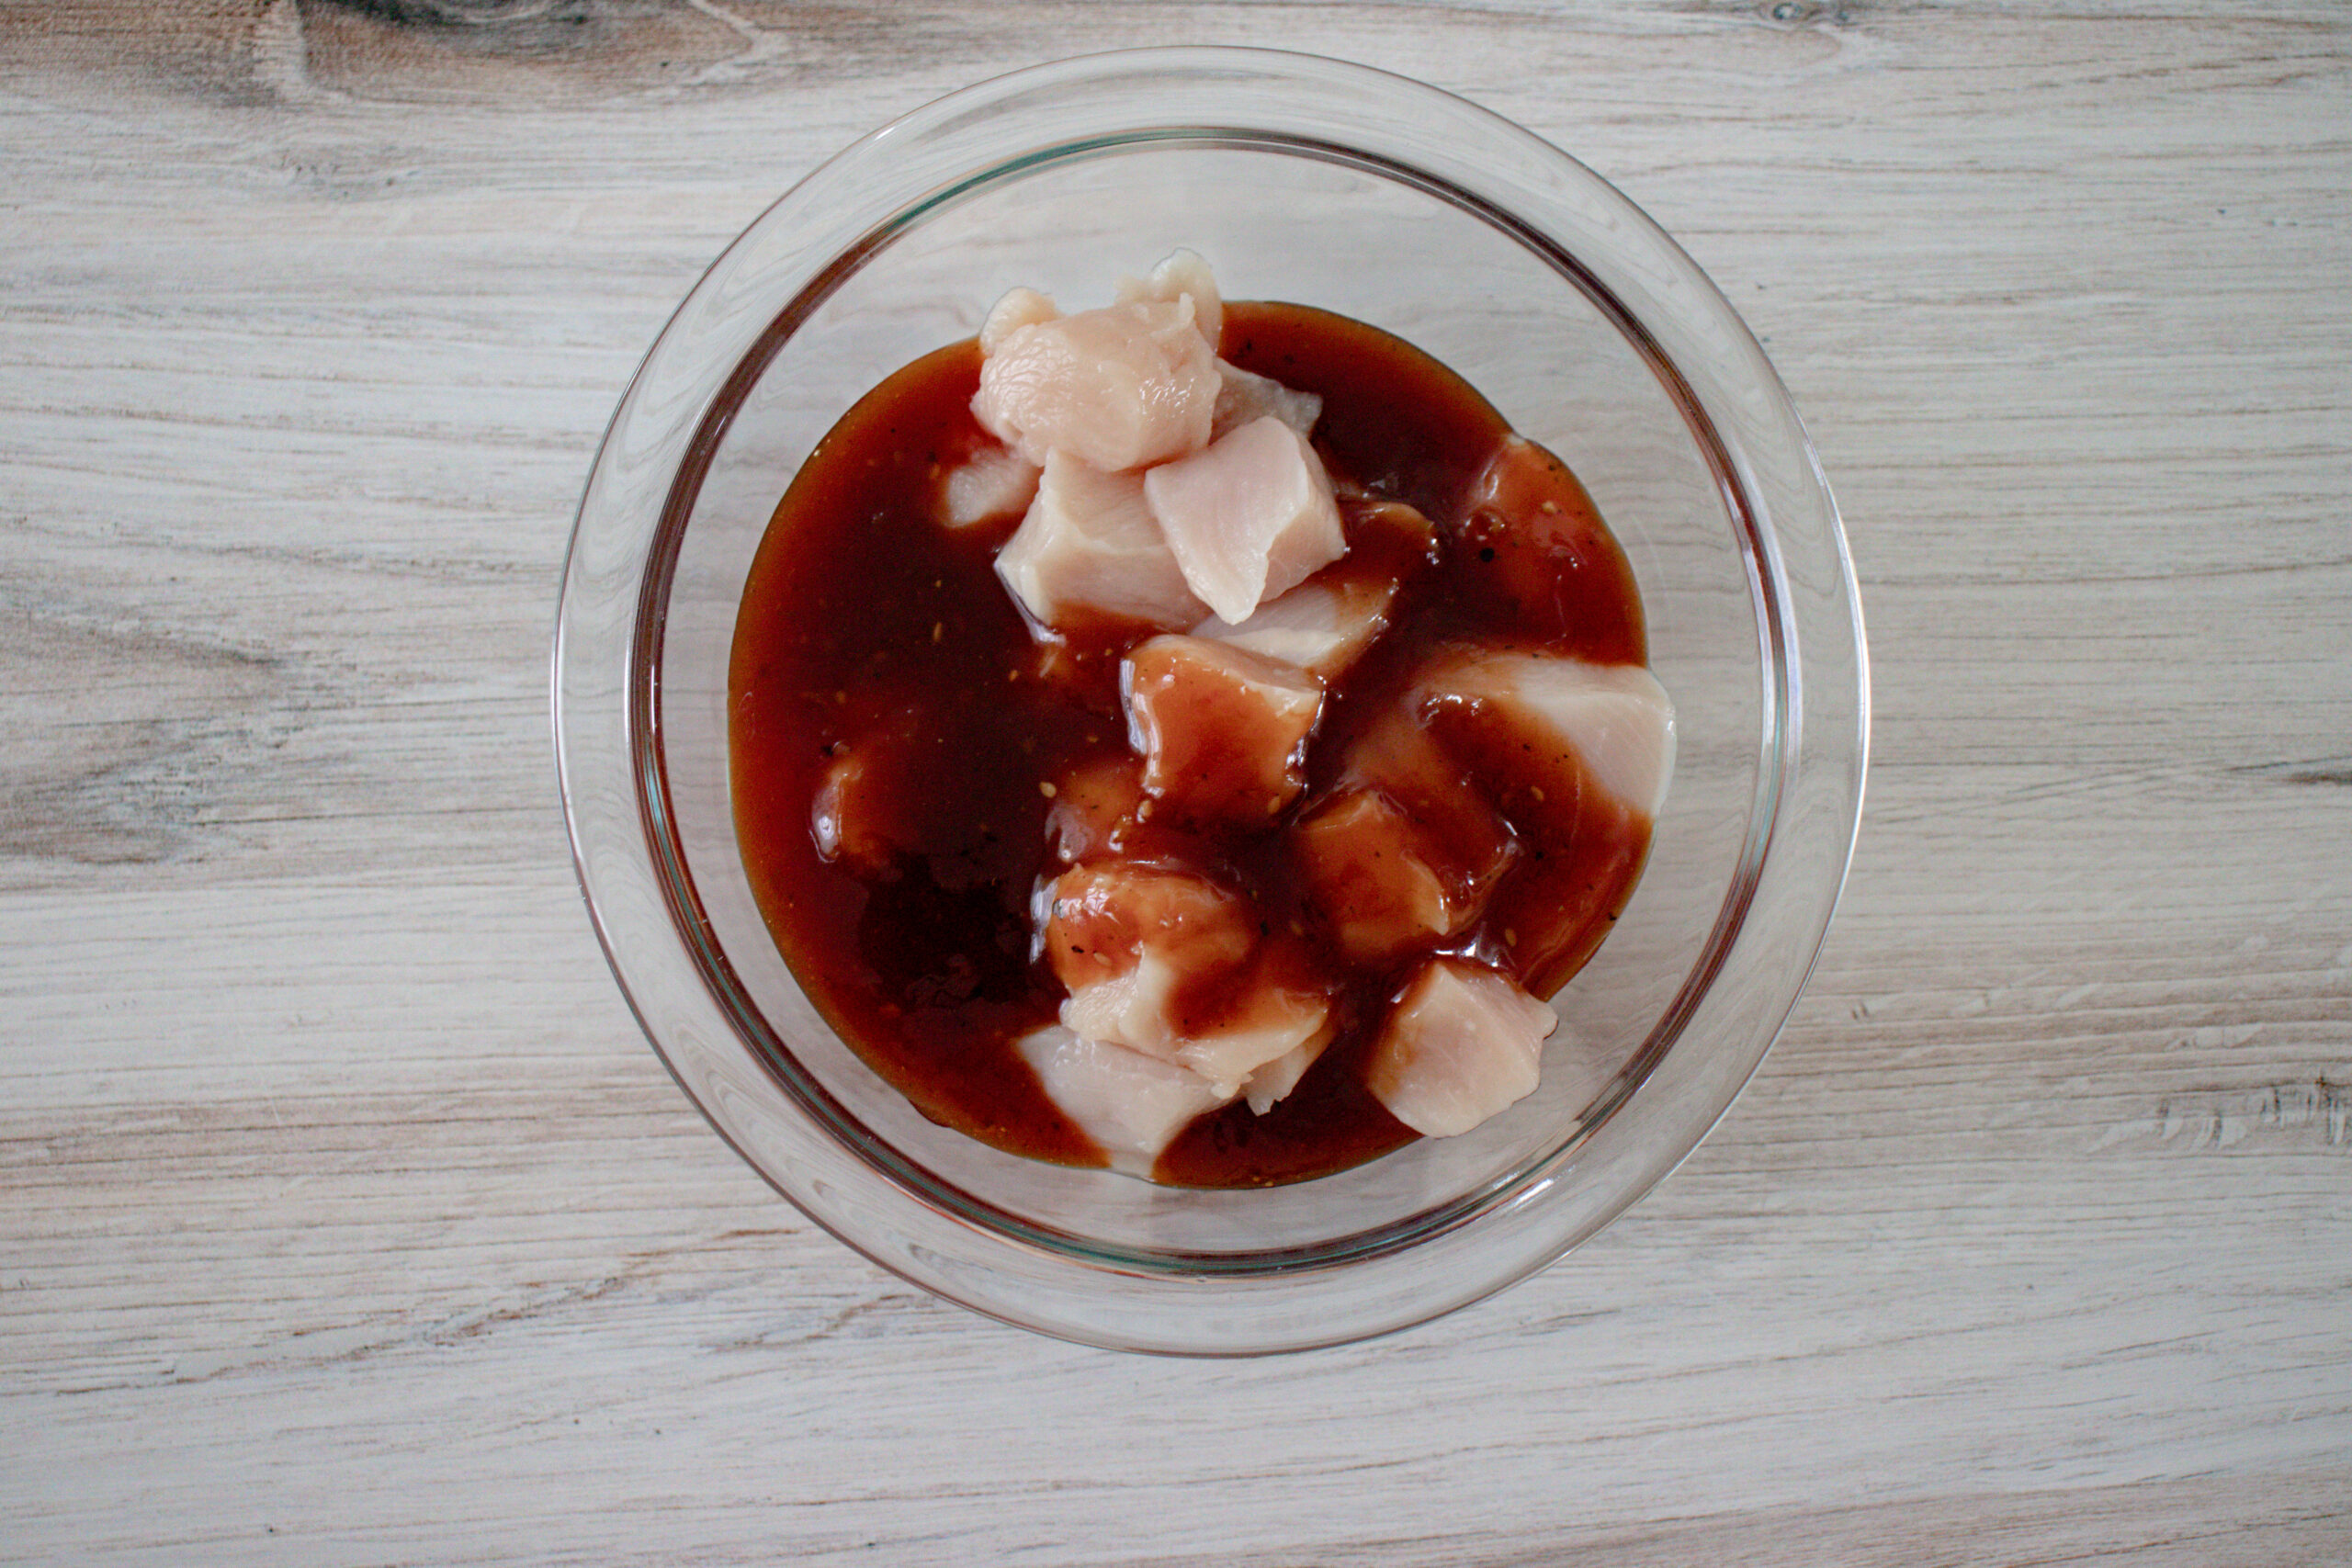 A glass bowl of chicken marinating in sauce.